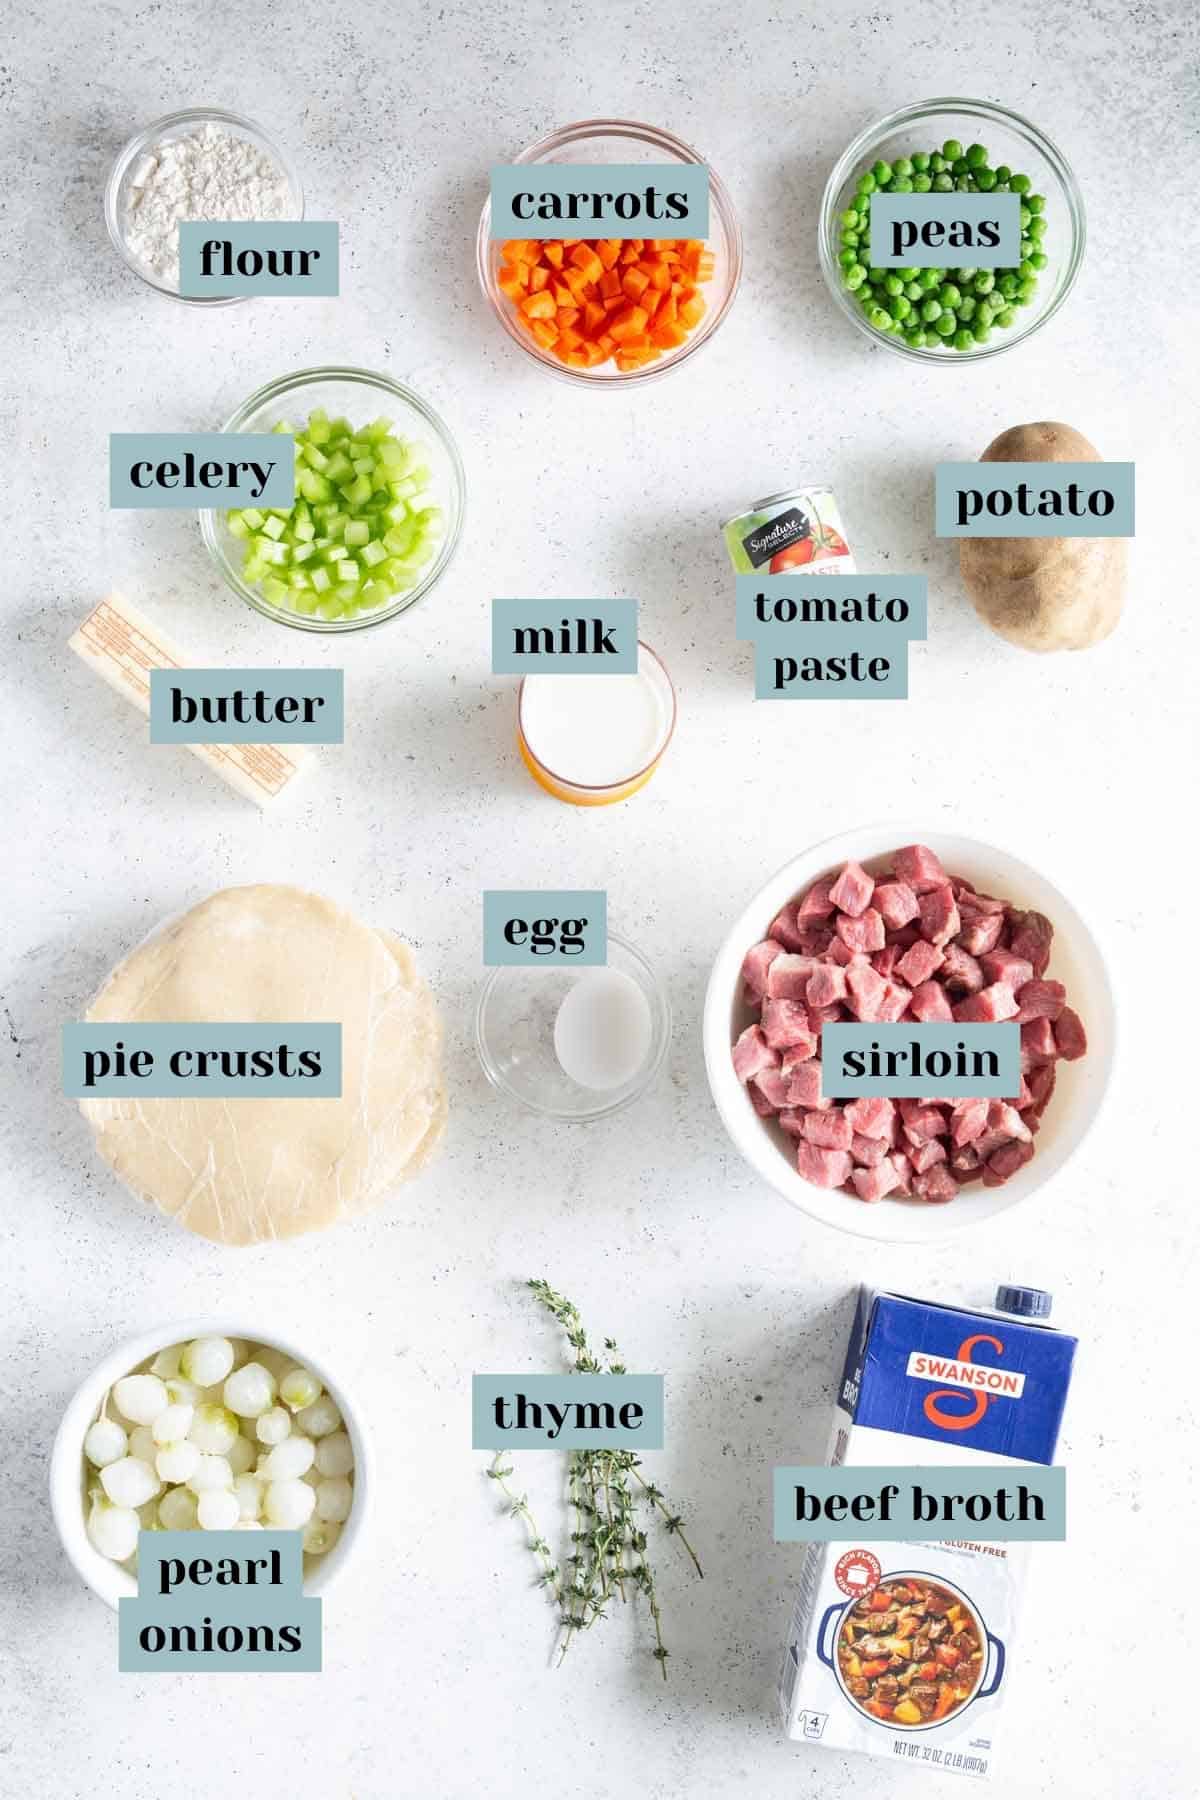 Ingredients for cooking laid out on a table, including vegetables, sirloin, pie crusts, and broth, labeled for clarity.